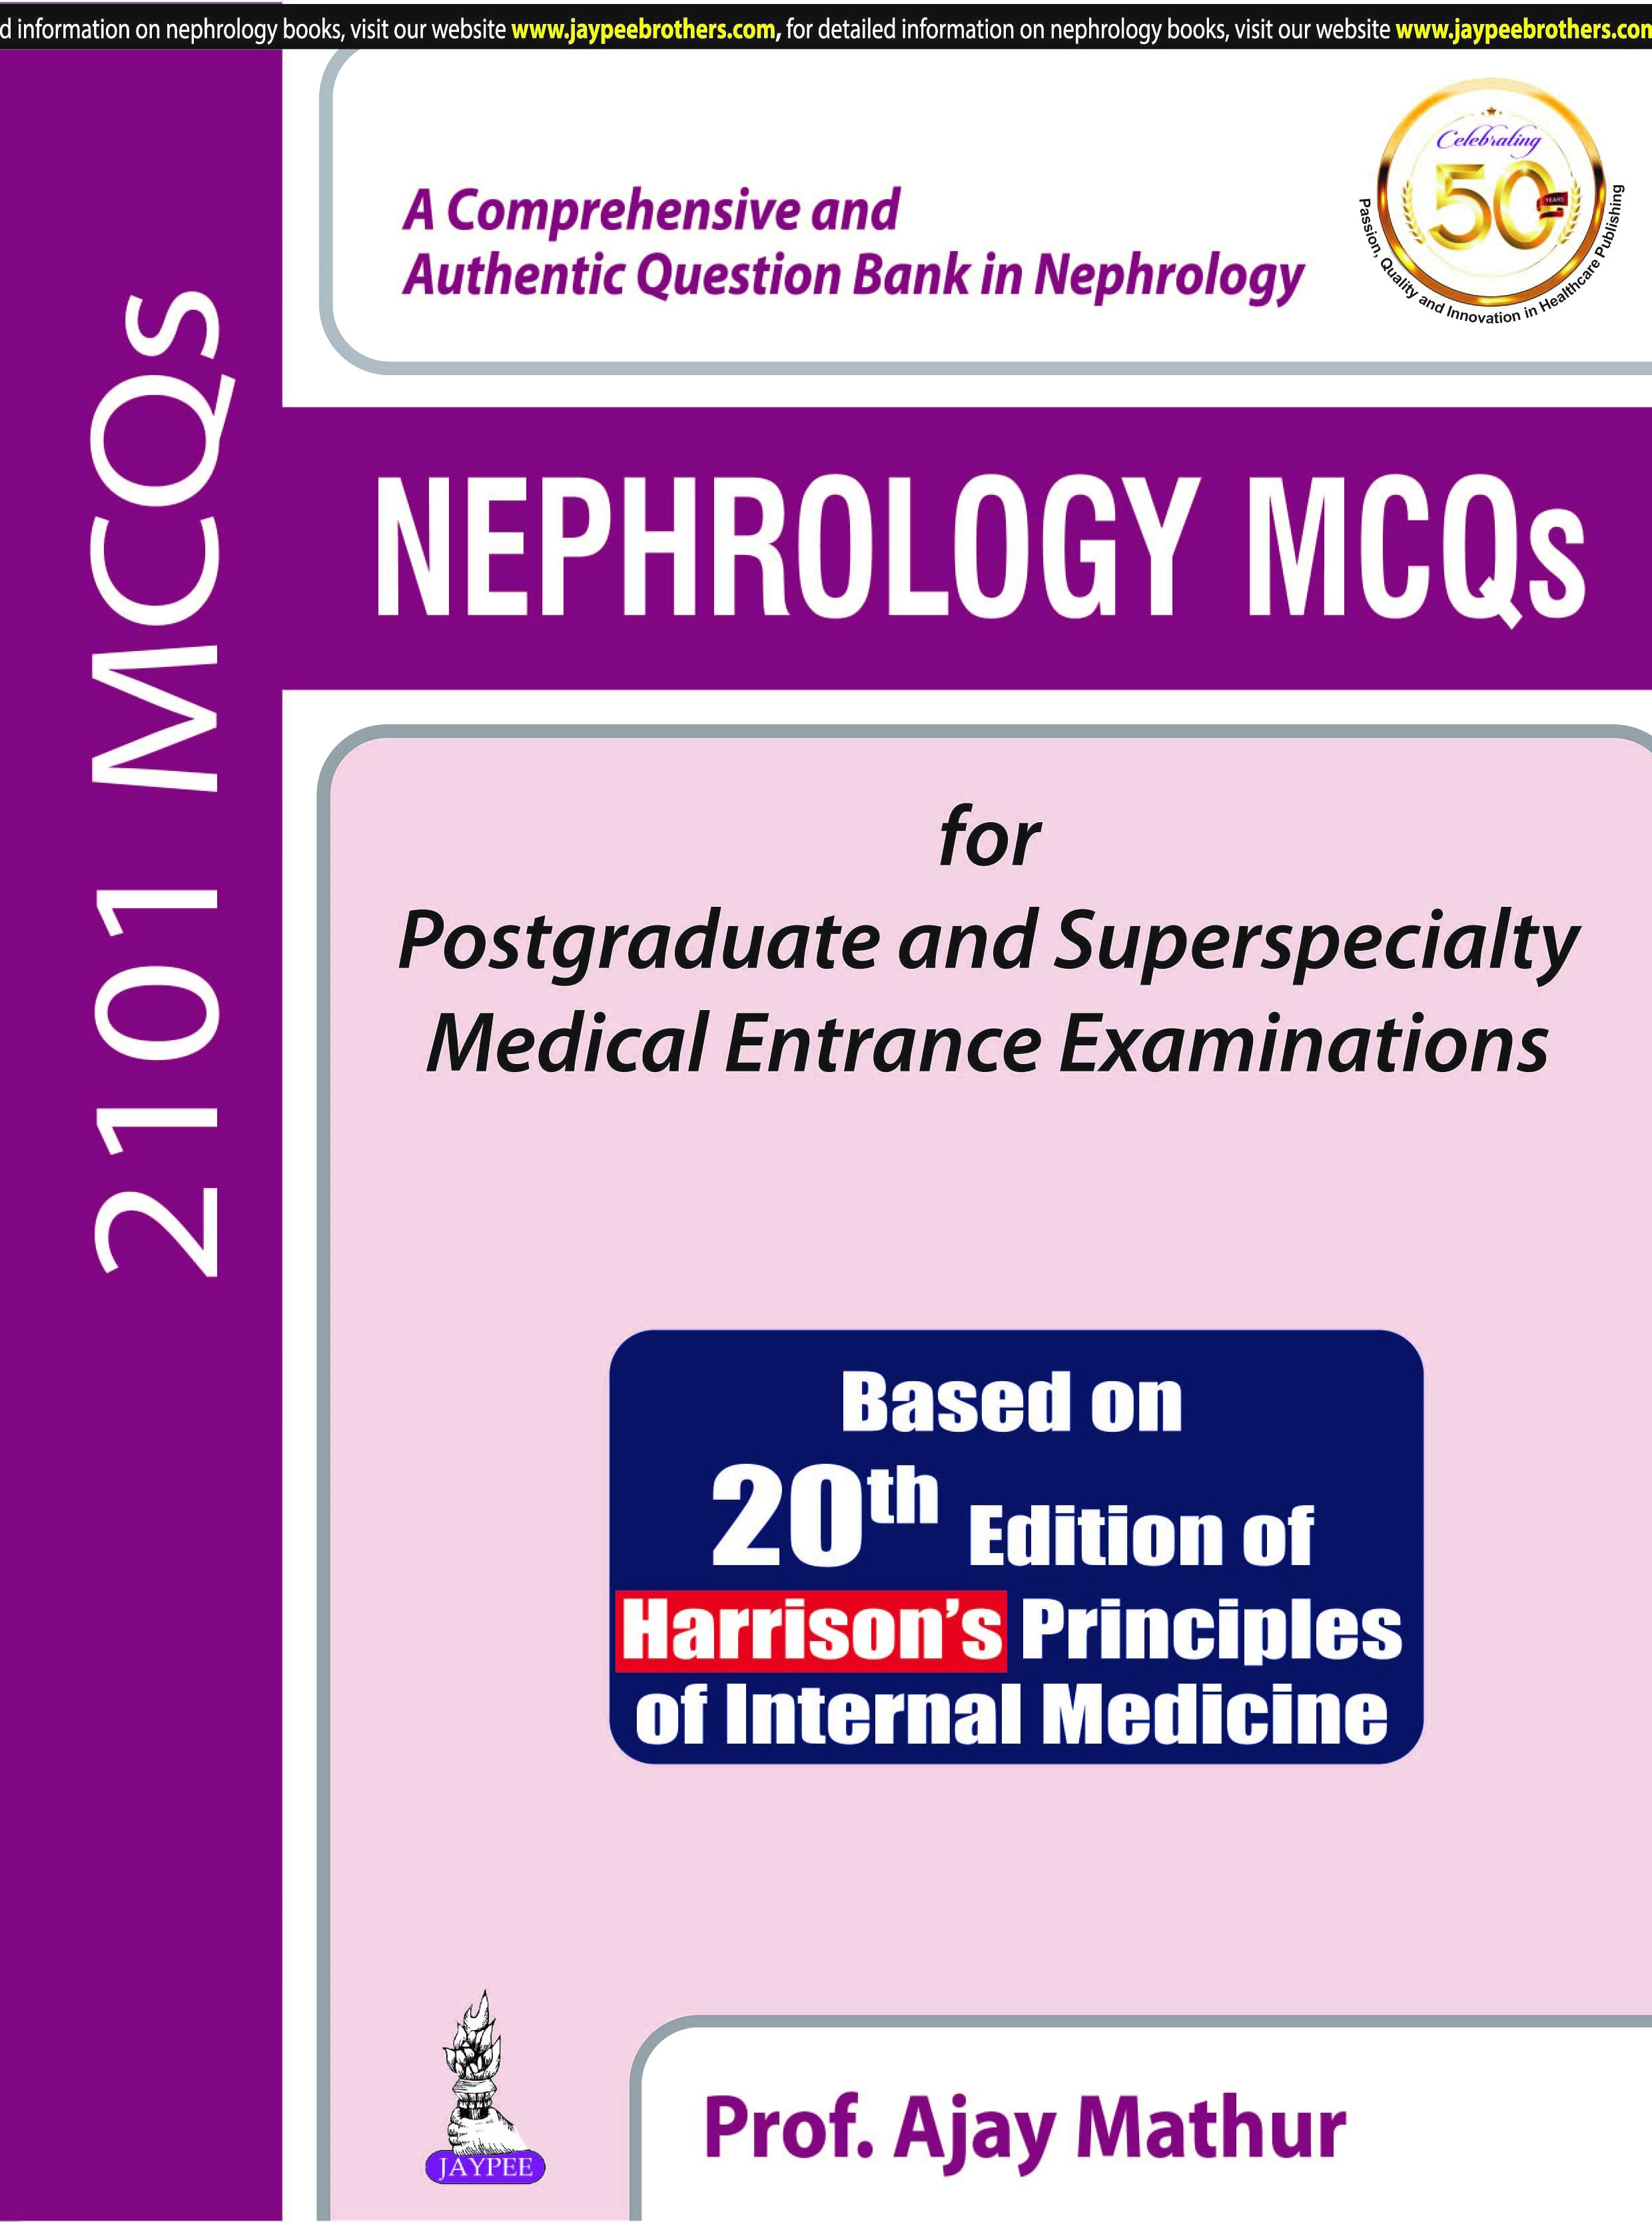 Nephrology Mcqs For Postgraduate And Superspecialty Medical Entrance Examinations